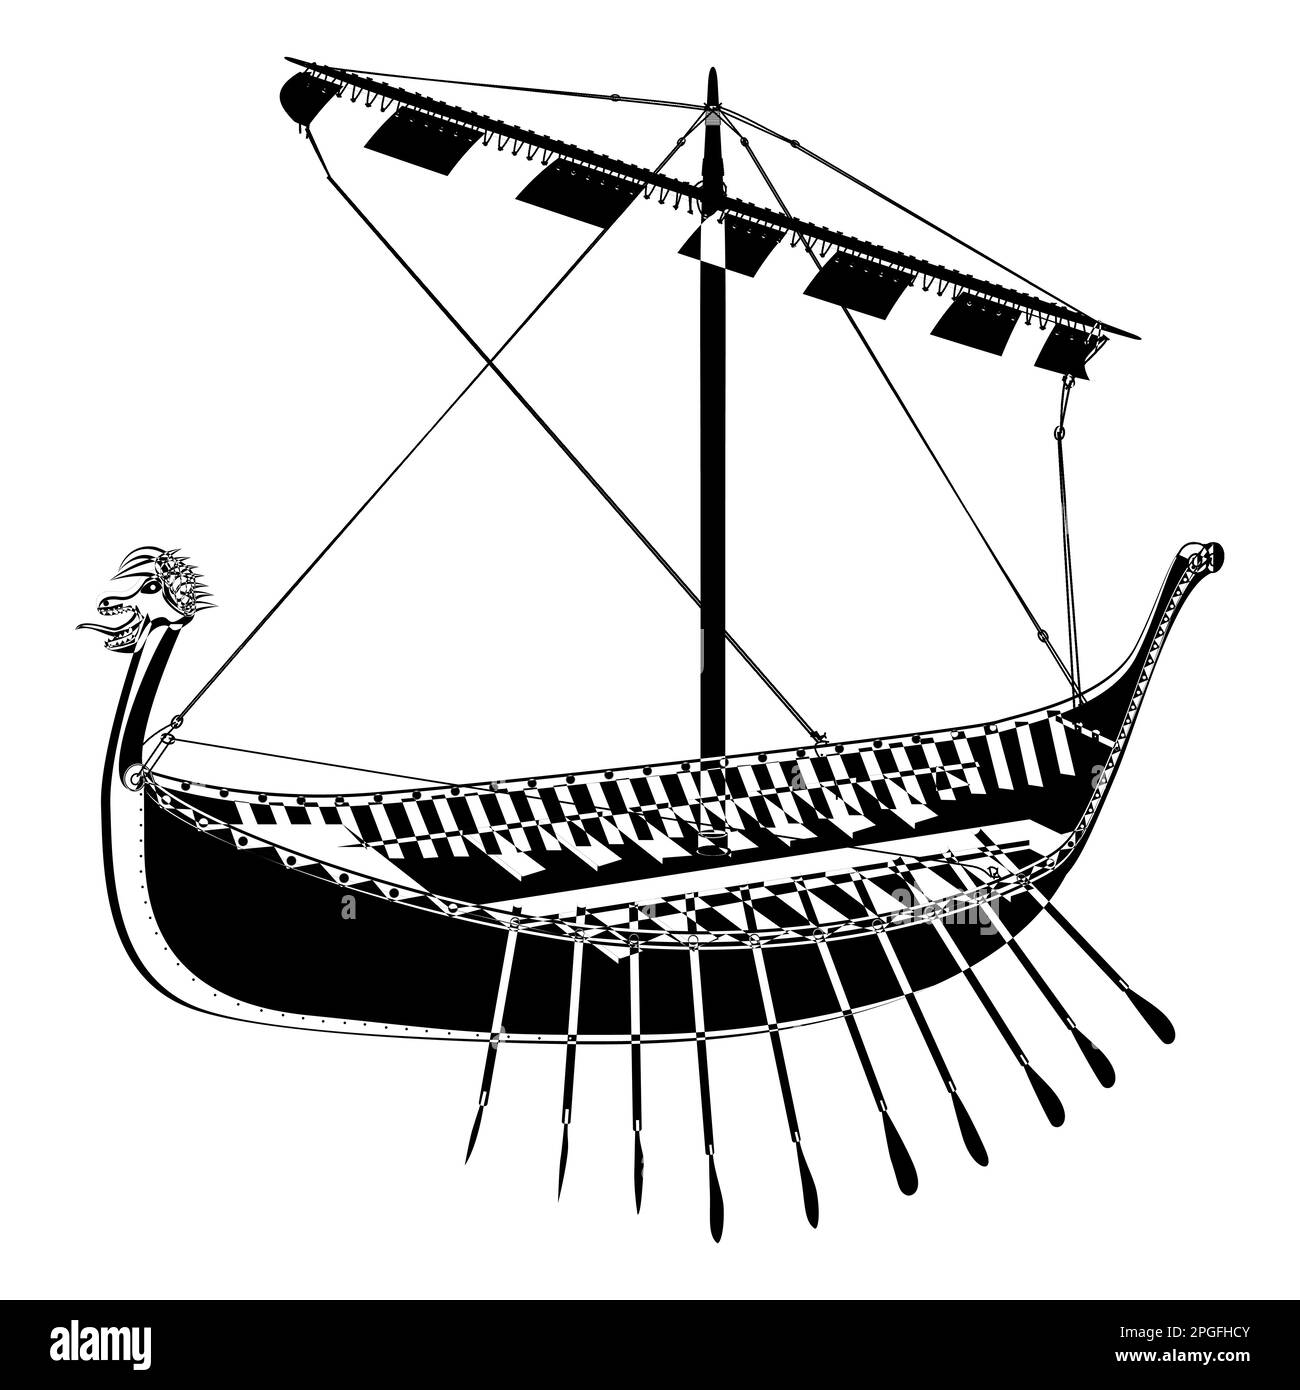 Drakkar. Viking rowing Ship in outline style. Norman ship sailing. Vector illustration isolated on white background. Stock Vector